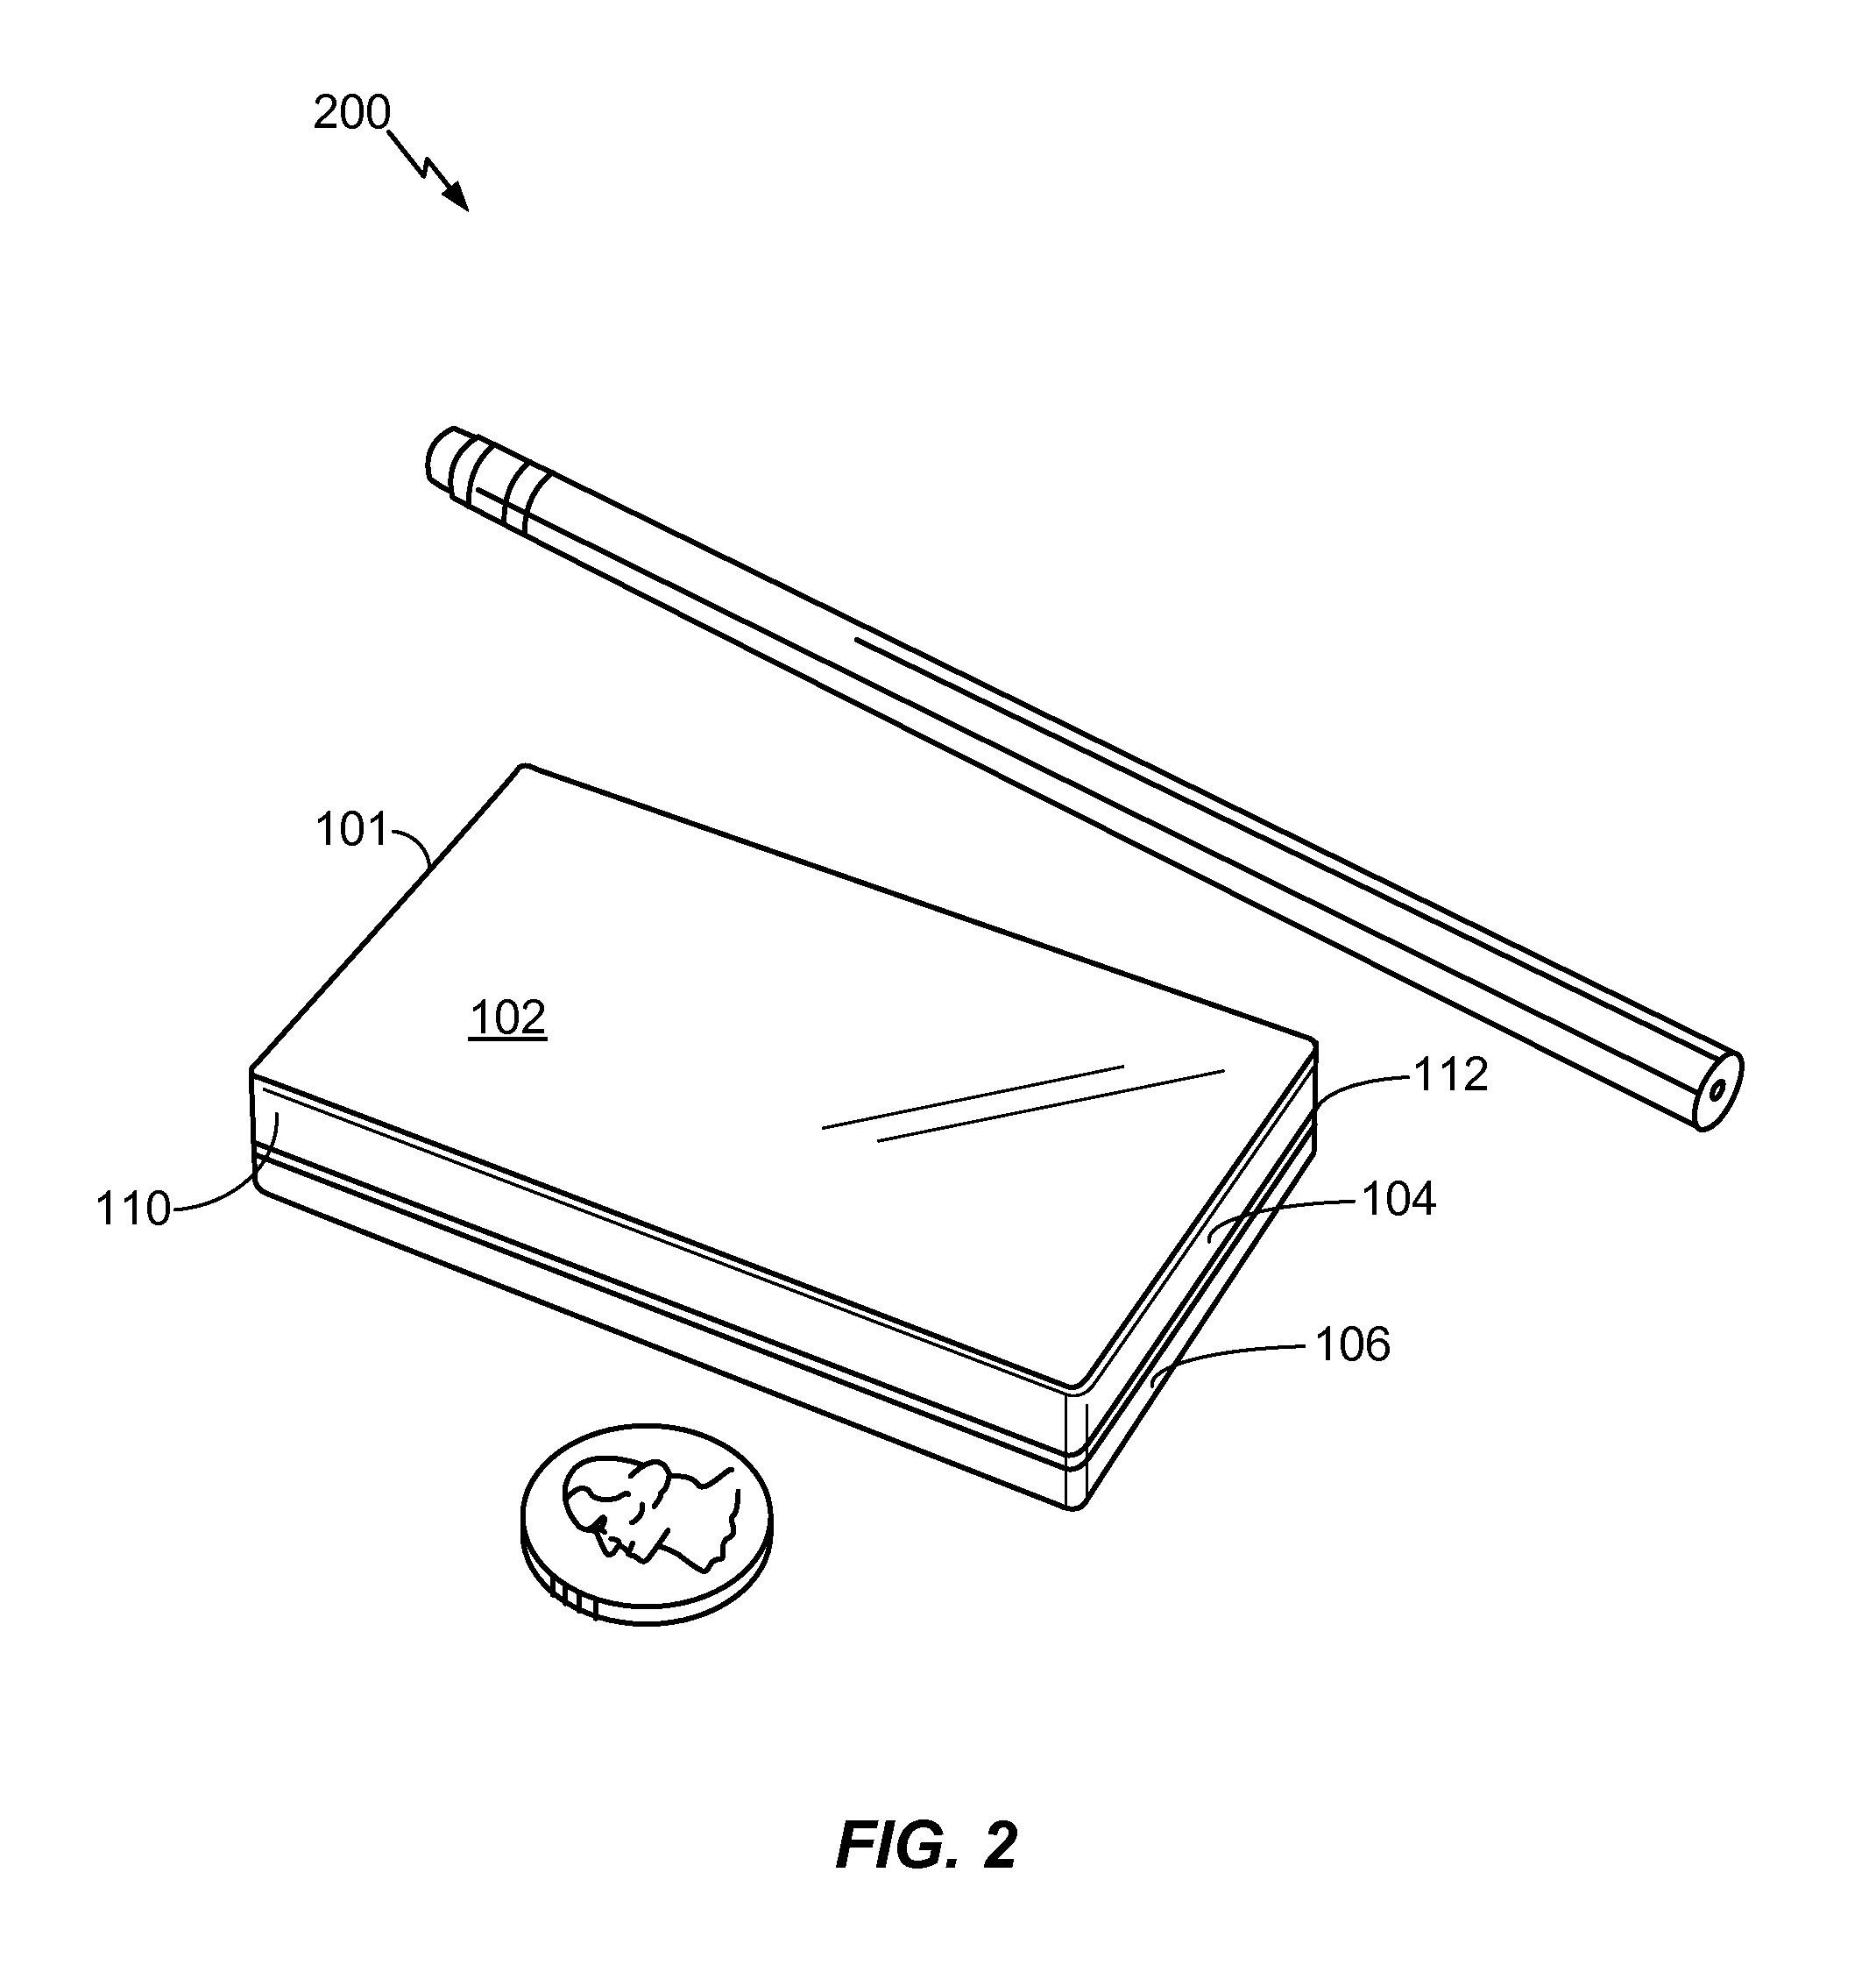 Multi-panel device with configurable interface